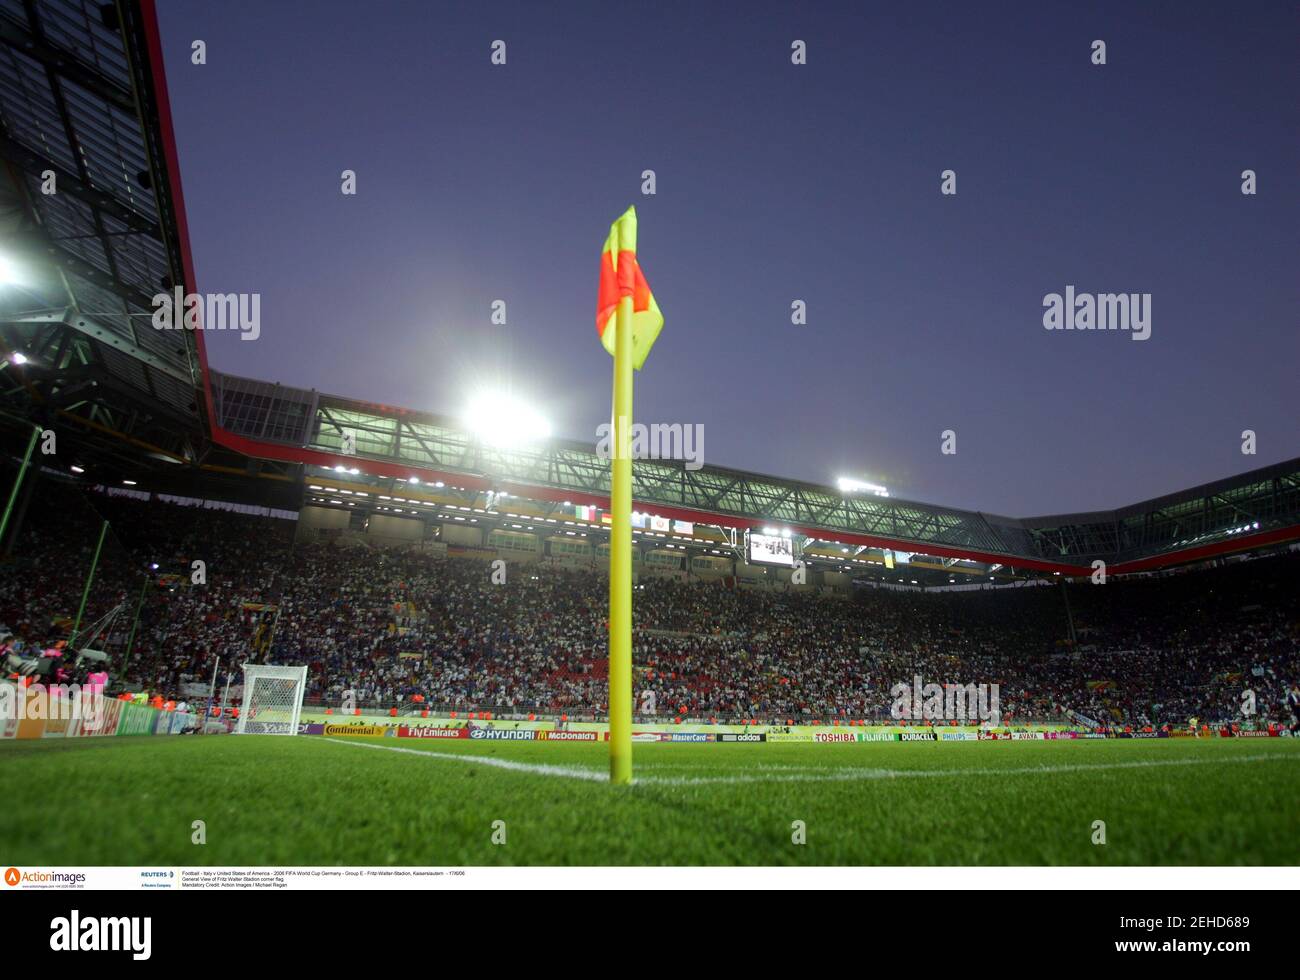 Football - Italy v United States of America - 2006 FIFA World Cup Germany - Group E - Fritz-Walter-Stadion, Kaiserslautern  - 17/6/06  General View Fritz-Walter-Stadion corner flag  Mandatory Credit: Action Images / Michael Regan Stock Photo